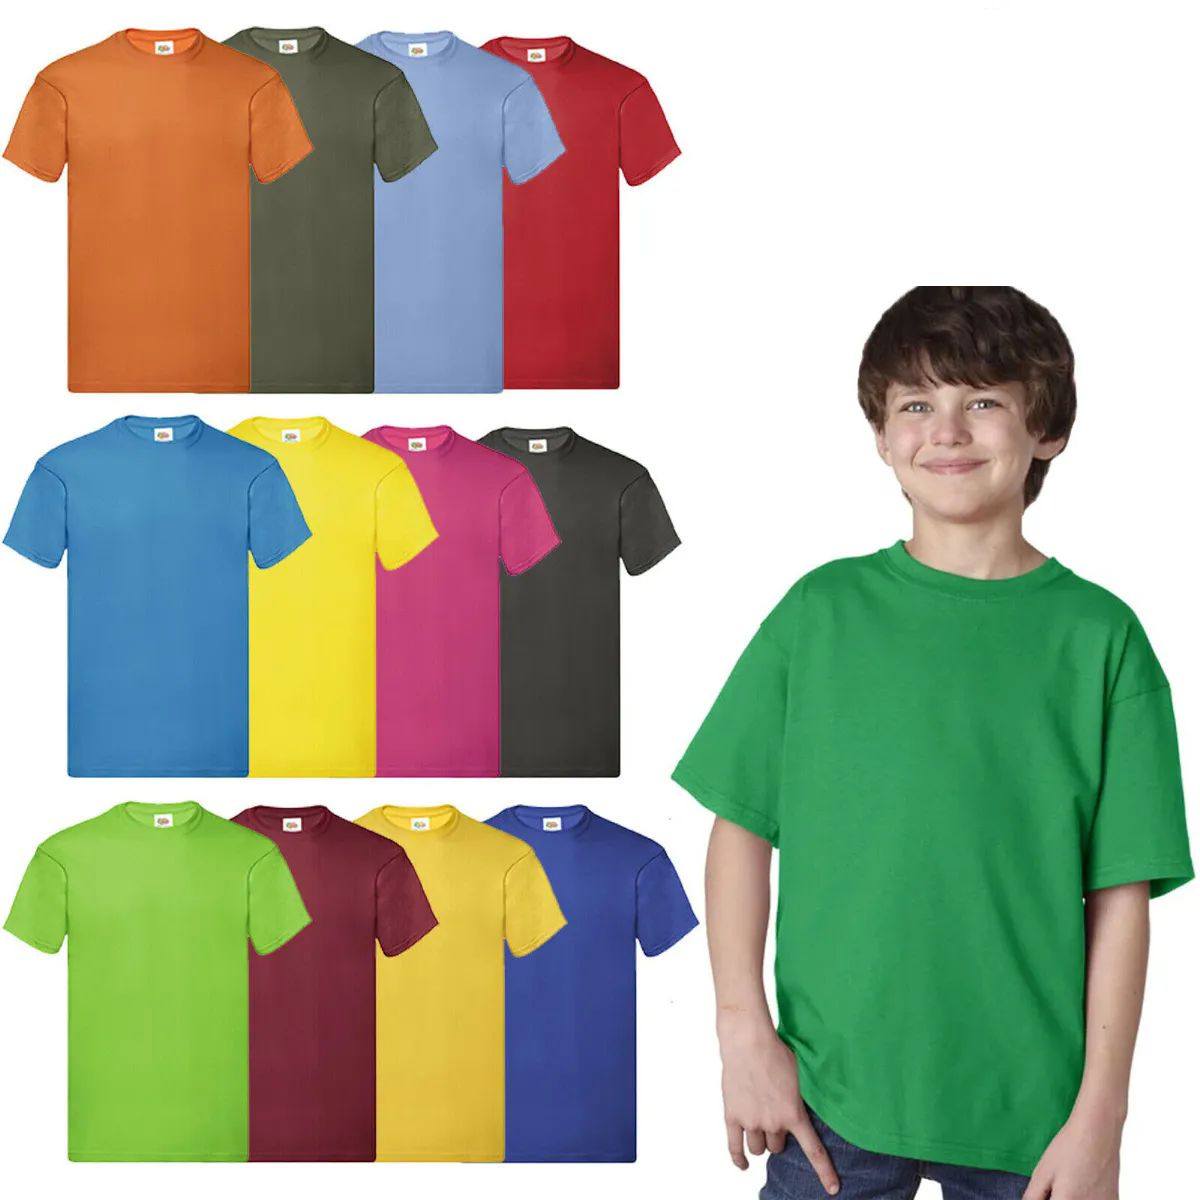 72 Pieces of Billion Hats Kids Youth Cotton Assorted Colors T Shirts Size L